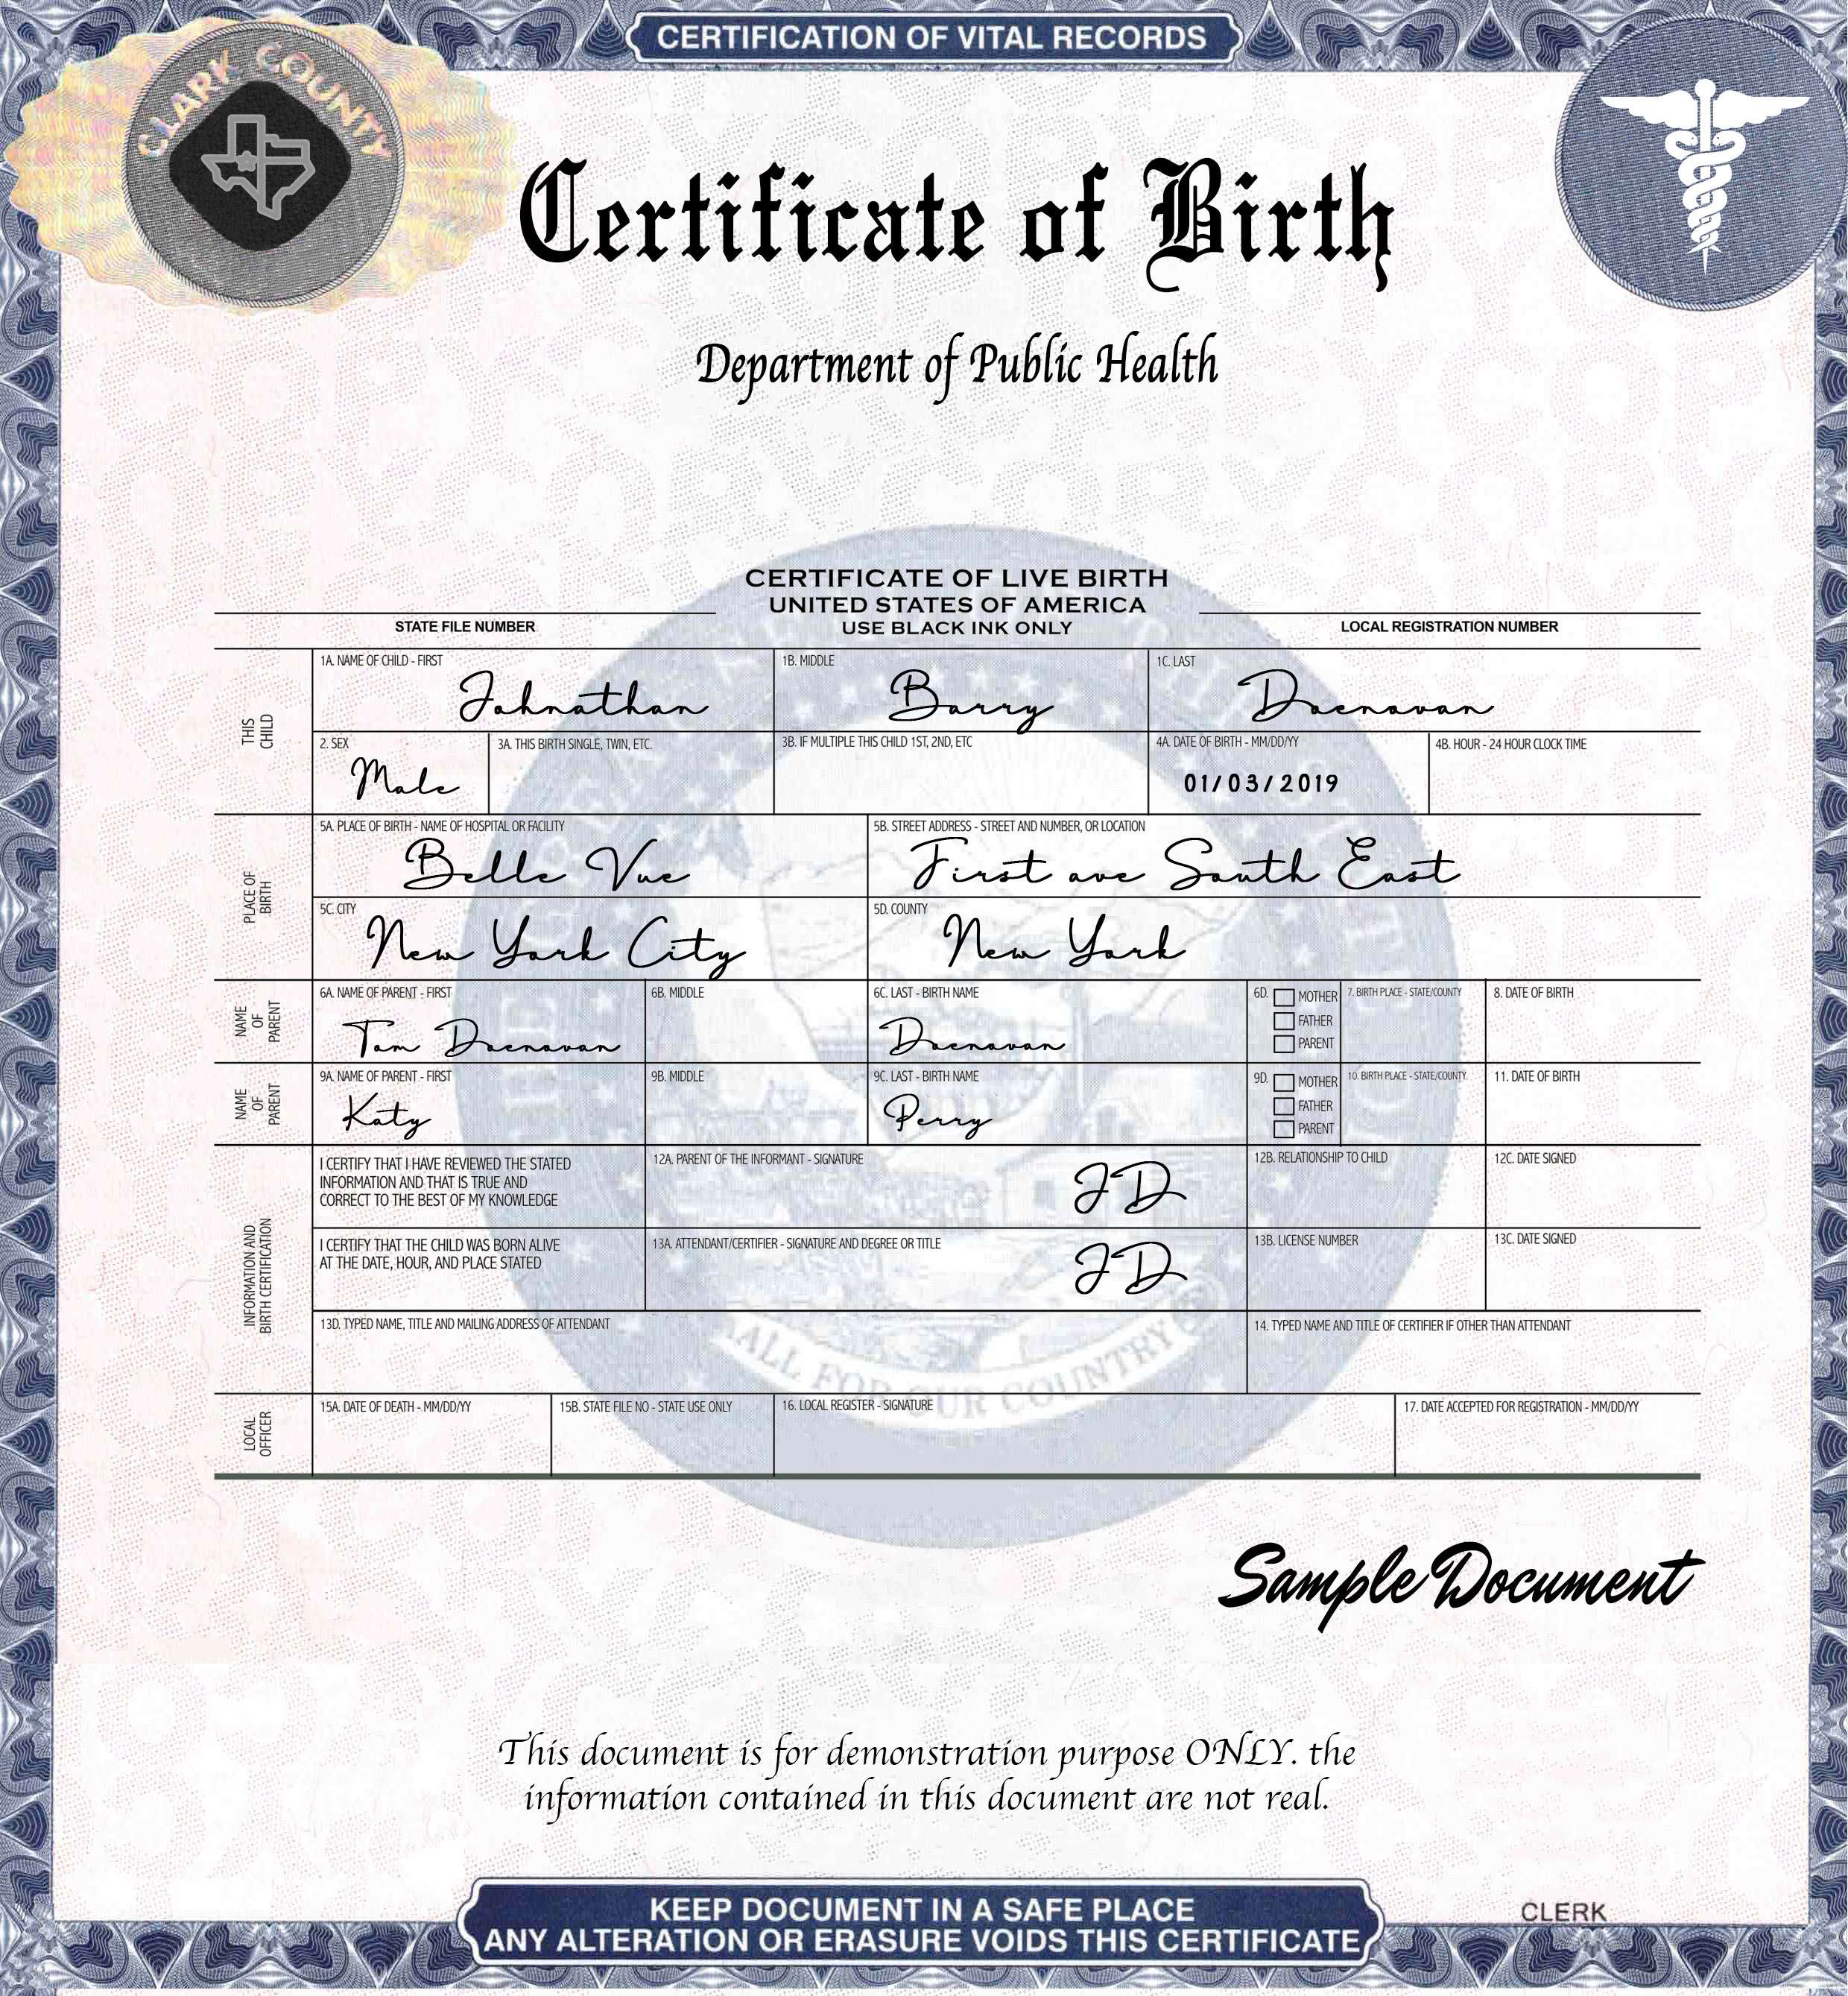 How To Know If a Birth Certificate is Official? VRO